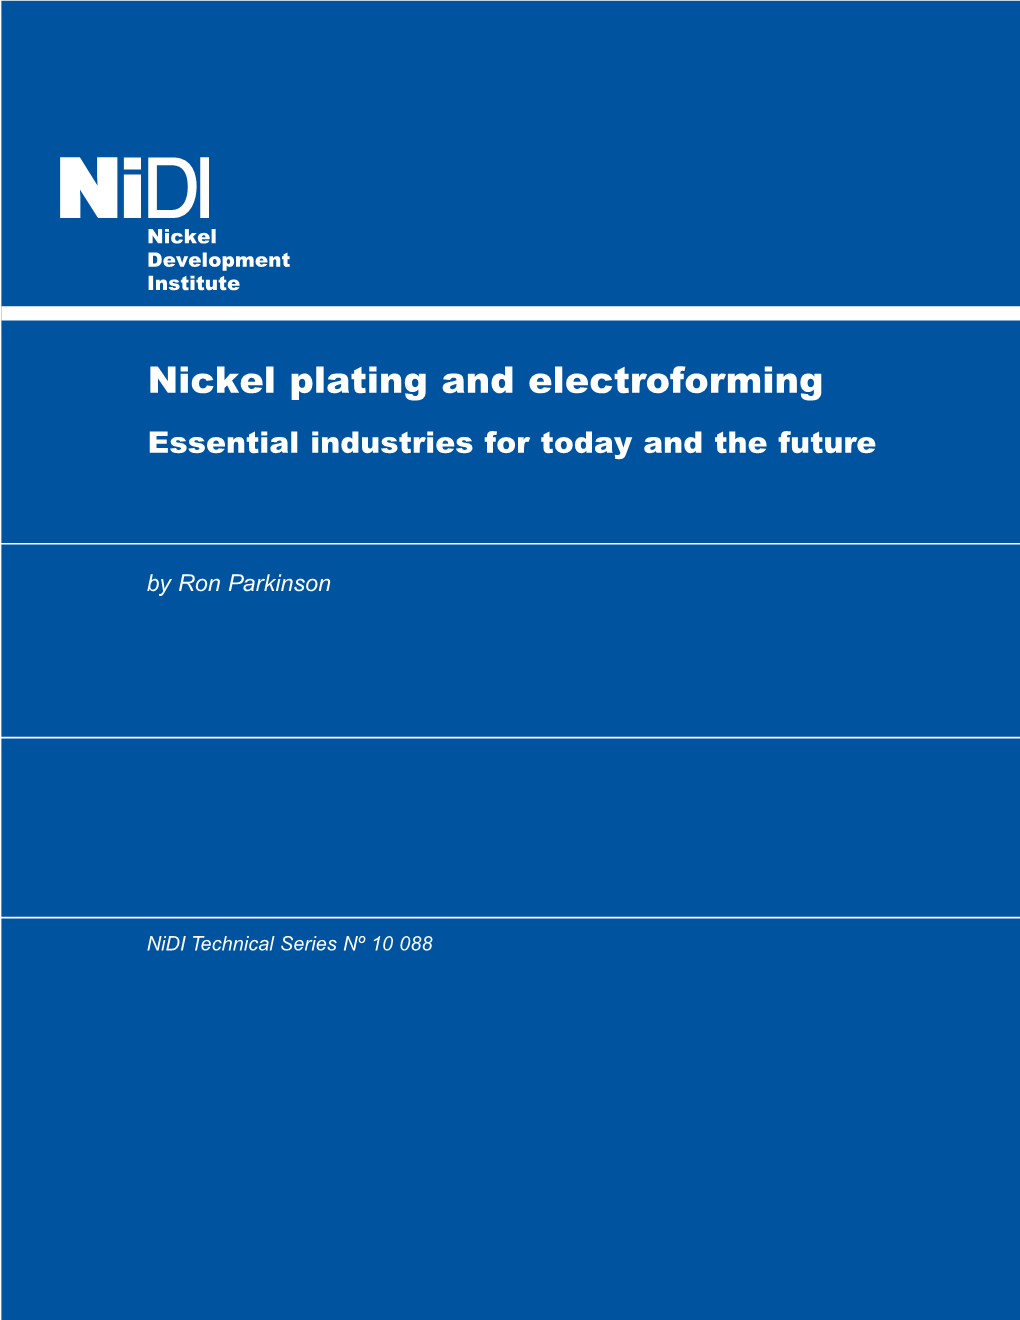 Nickel Plating and Electroforming Essential Industries for Today and the Future